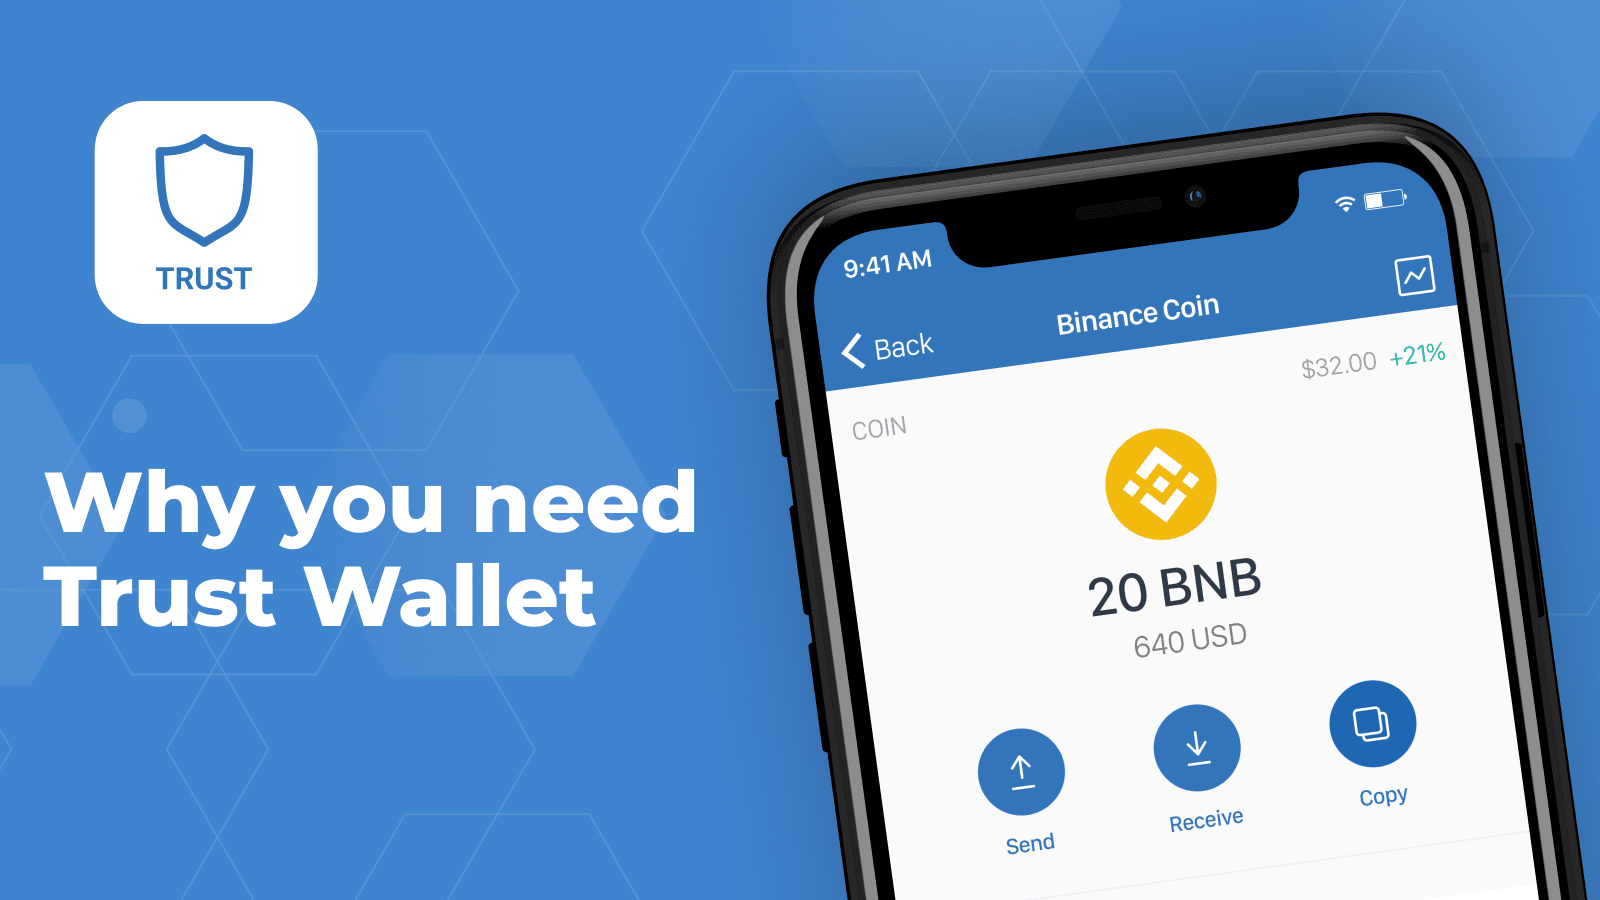 Binance Wallet Review: Pros, Cons, and Additional Features